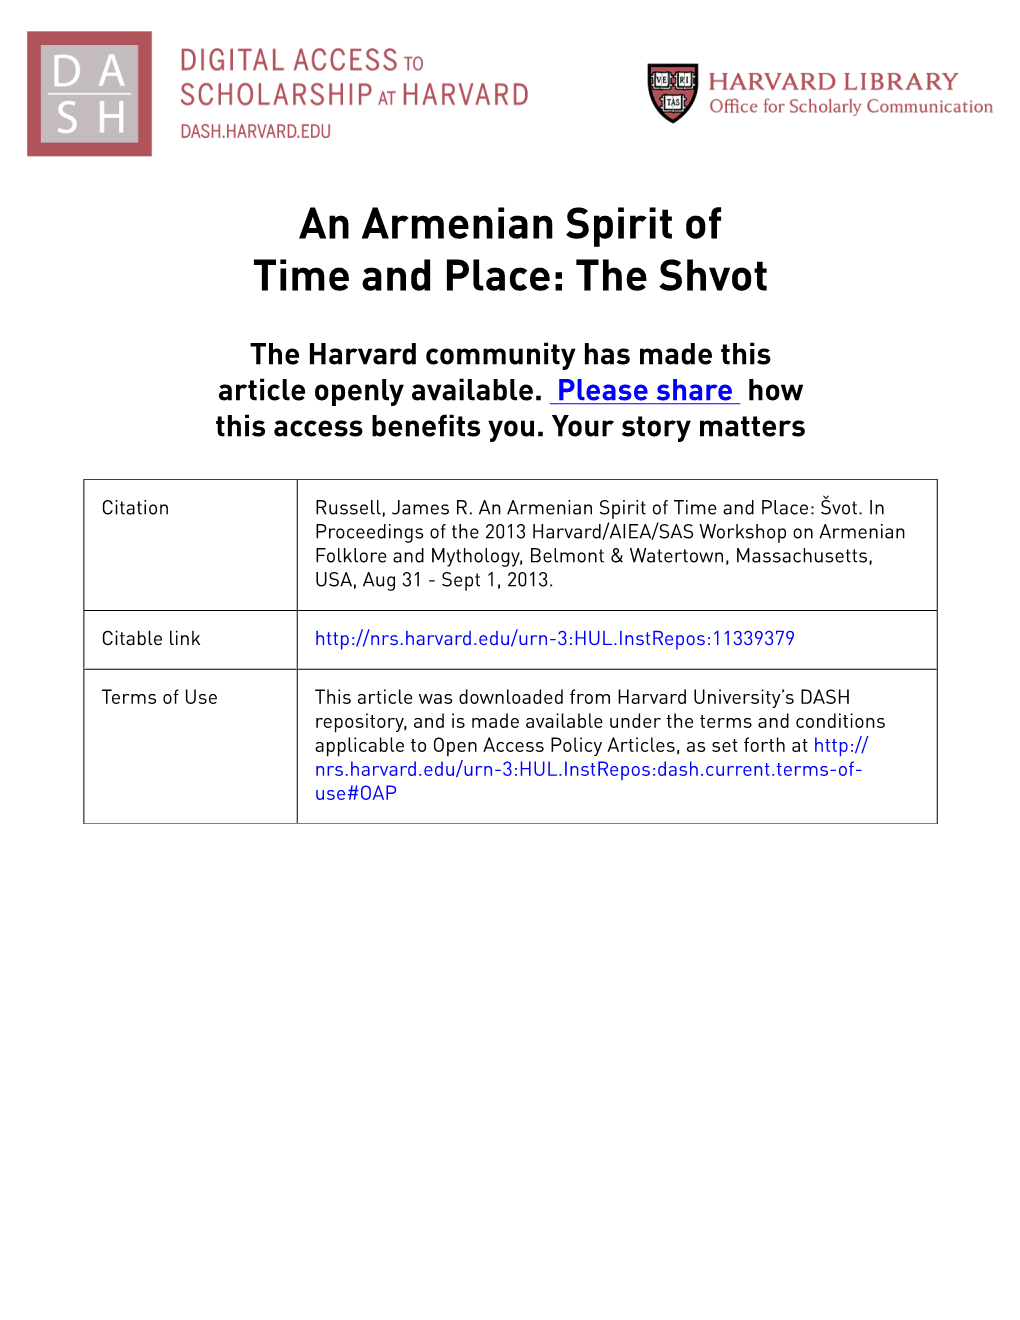 An Armenian Spirit of Time and Place: the Shvot